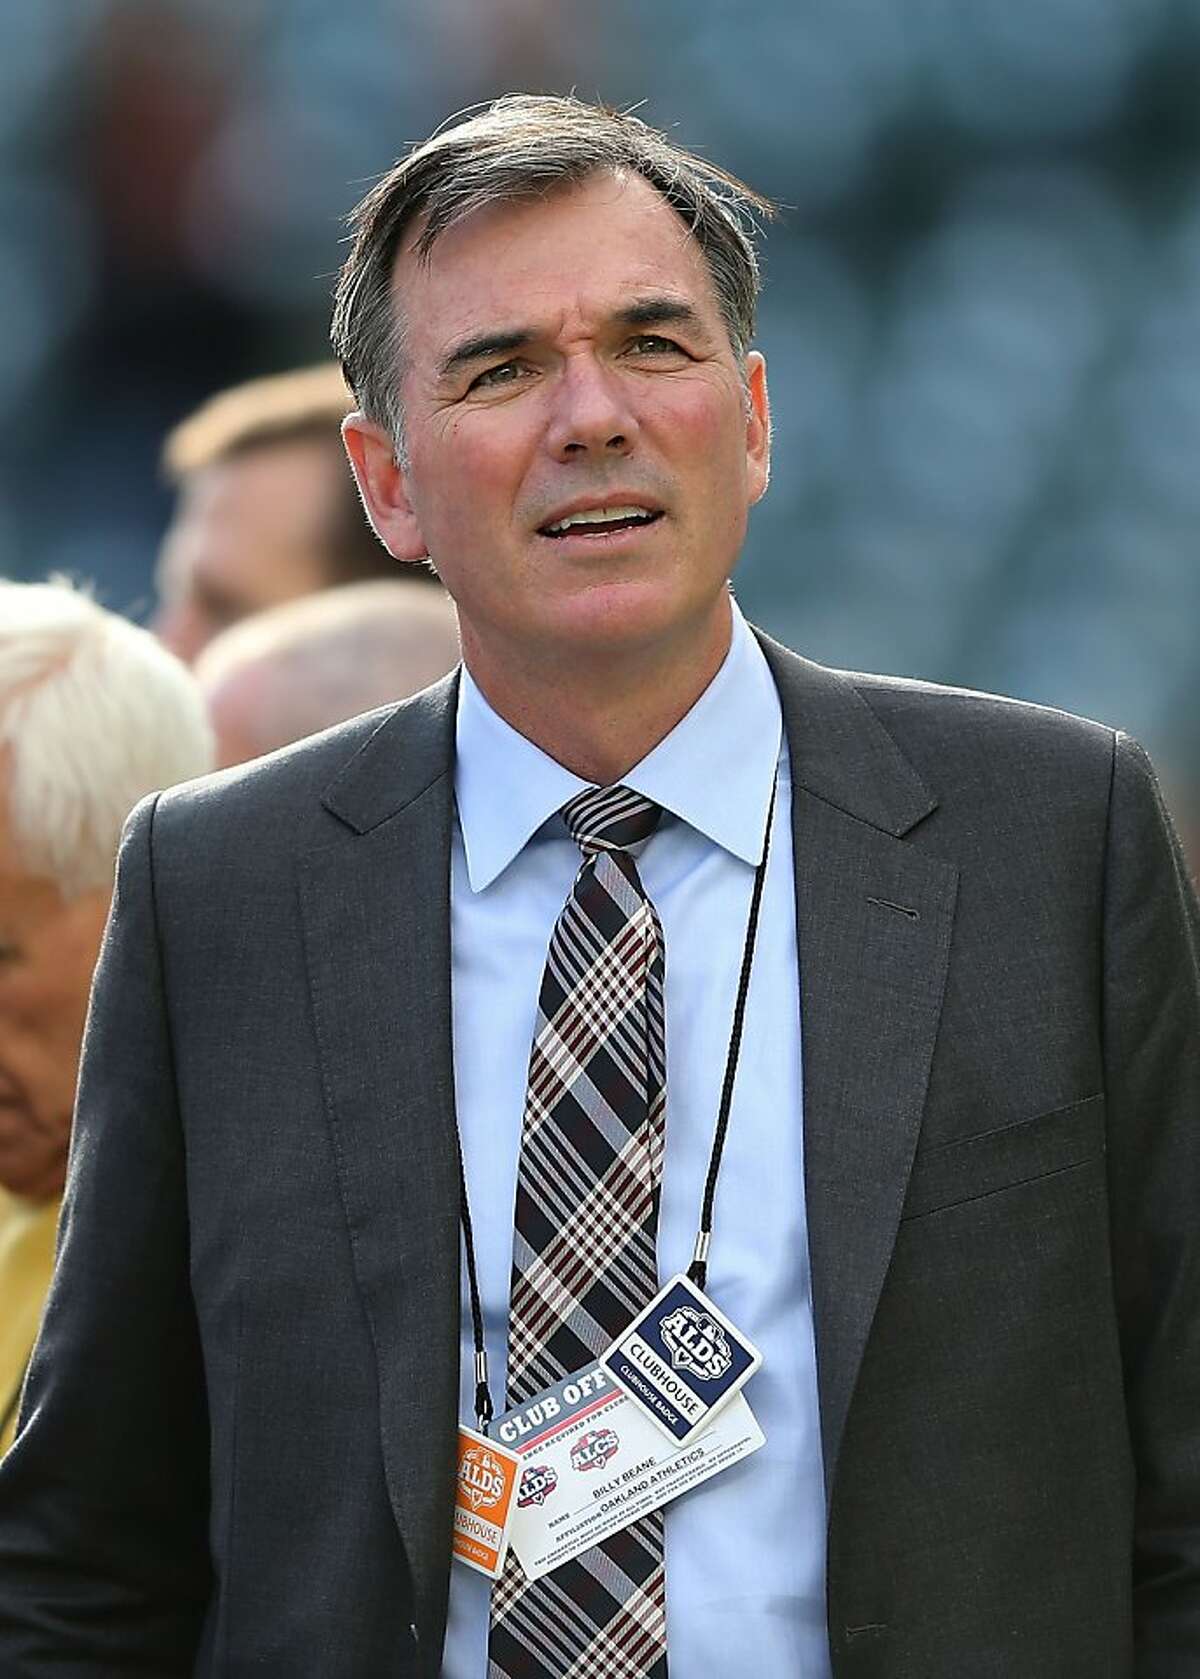 DETROIT, MI - OCTOBER 06: General manager Billy Beane of the Oakland Athletics watches batting practice prior to Game One of the American League Division Series against the Detroit Tigers at Comerica Park on October 6, 2012 in Detroit, Michigan. (Photo by Leon Halip/Getty Images)